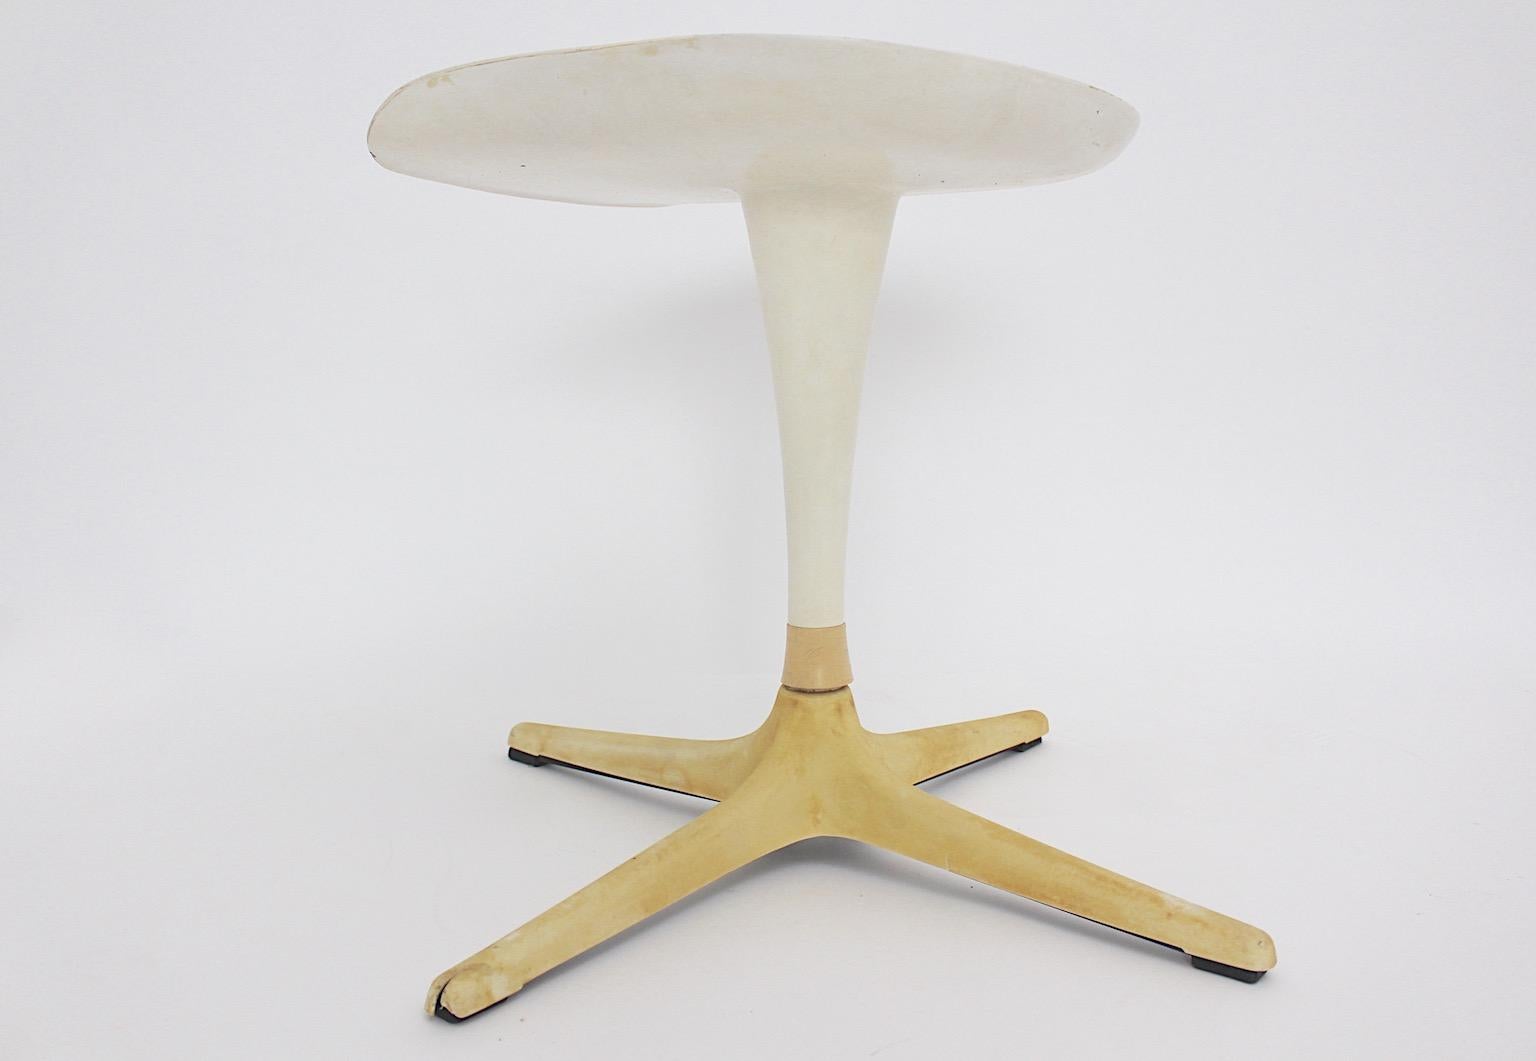 Space Age Vintage White Plastic Metal Stool by Luigi Colani  Germany 1971 For Sale 1